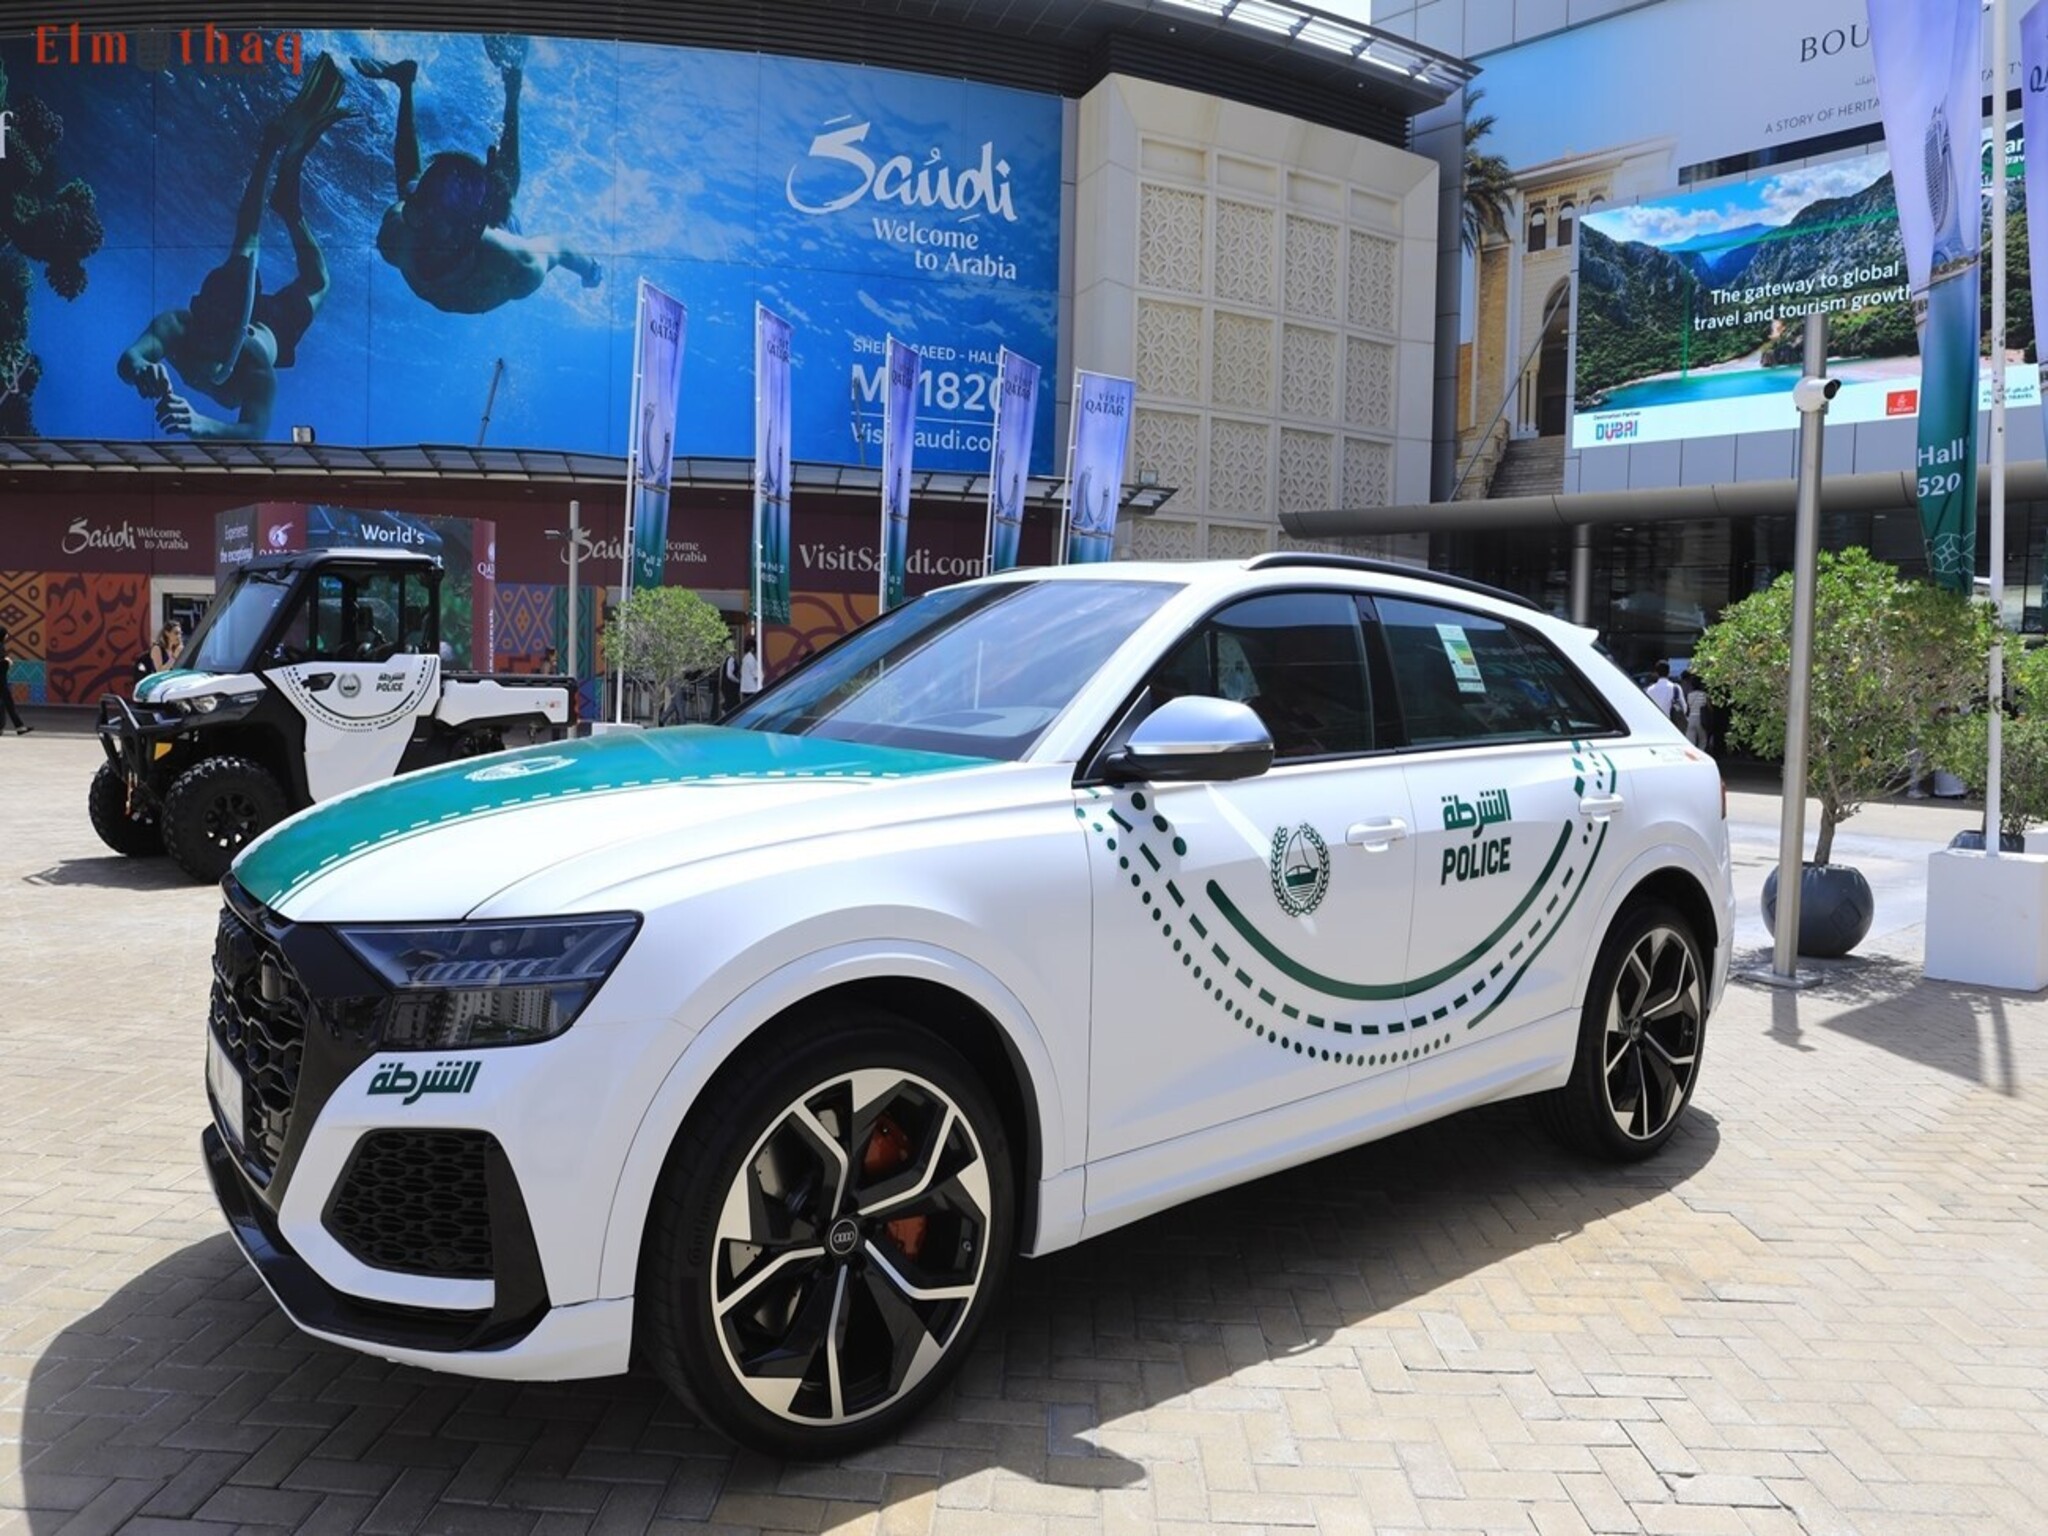 UAE Police introduces a new luxury car to its fleet